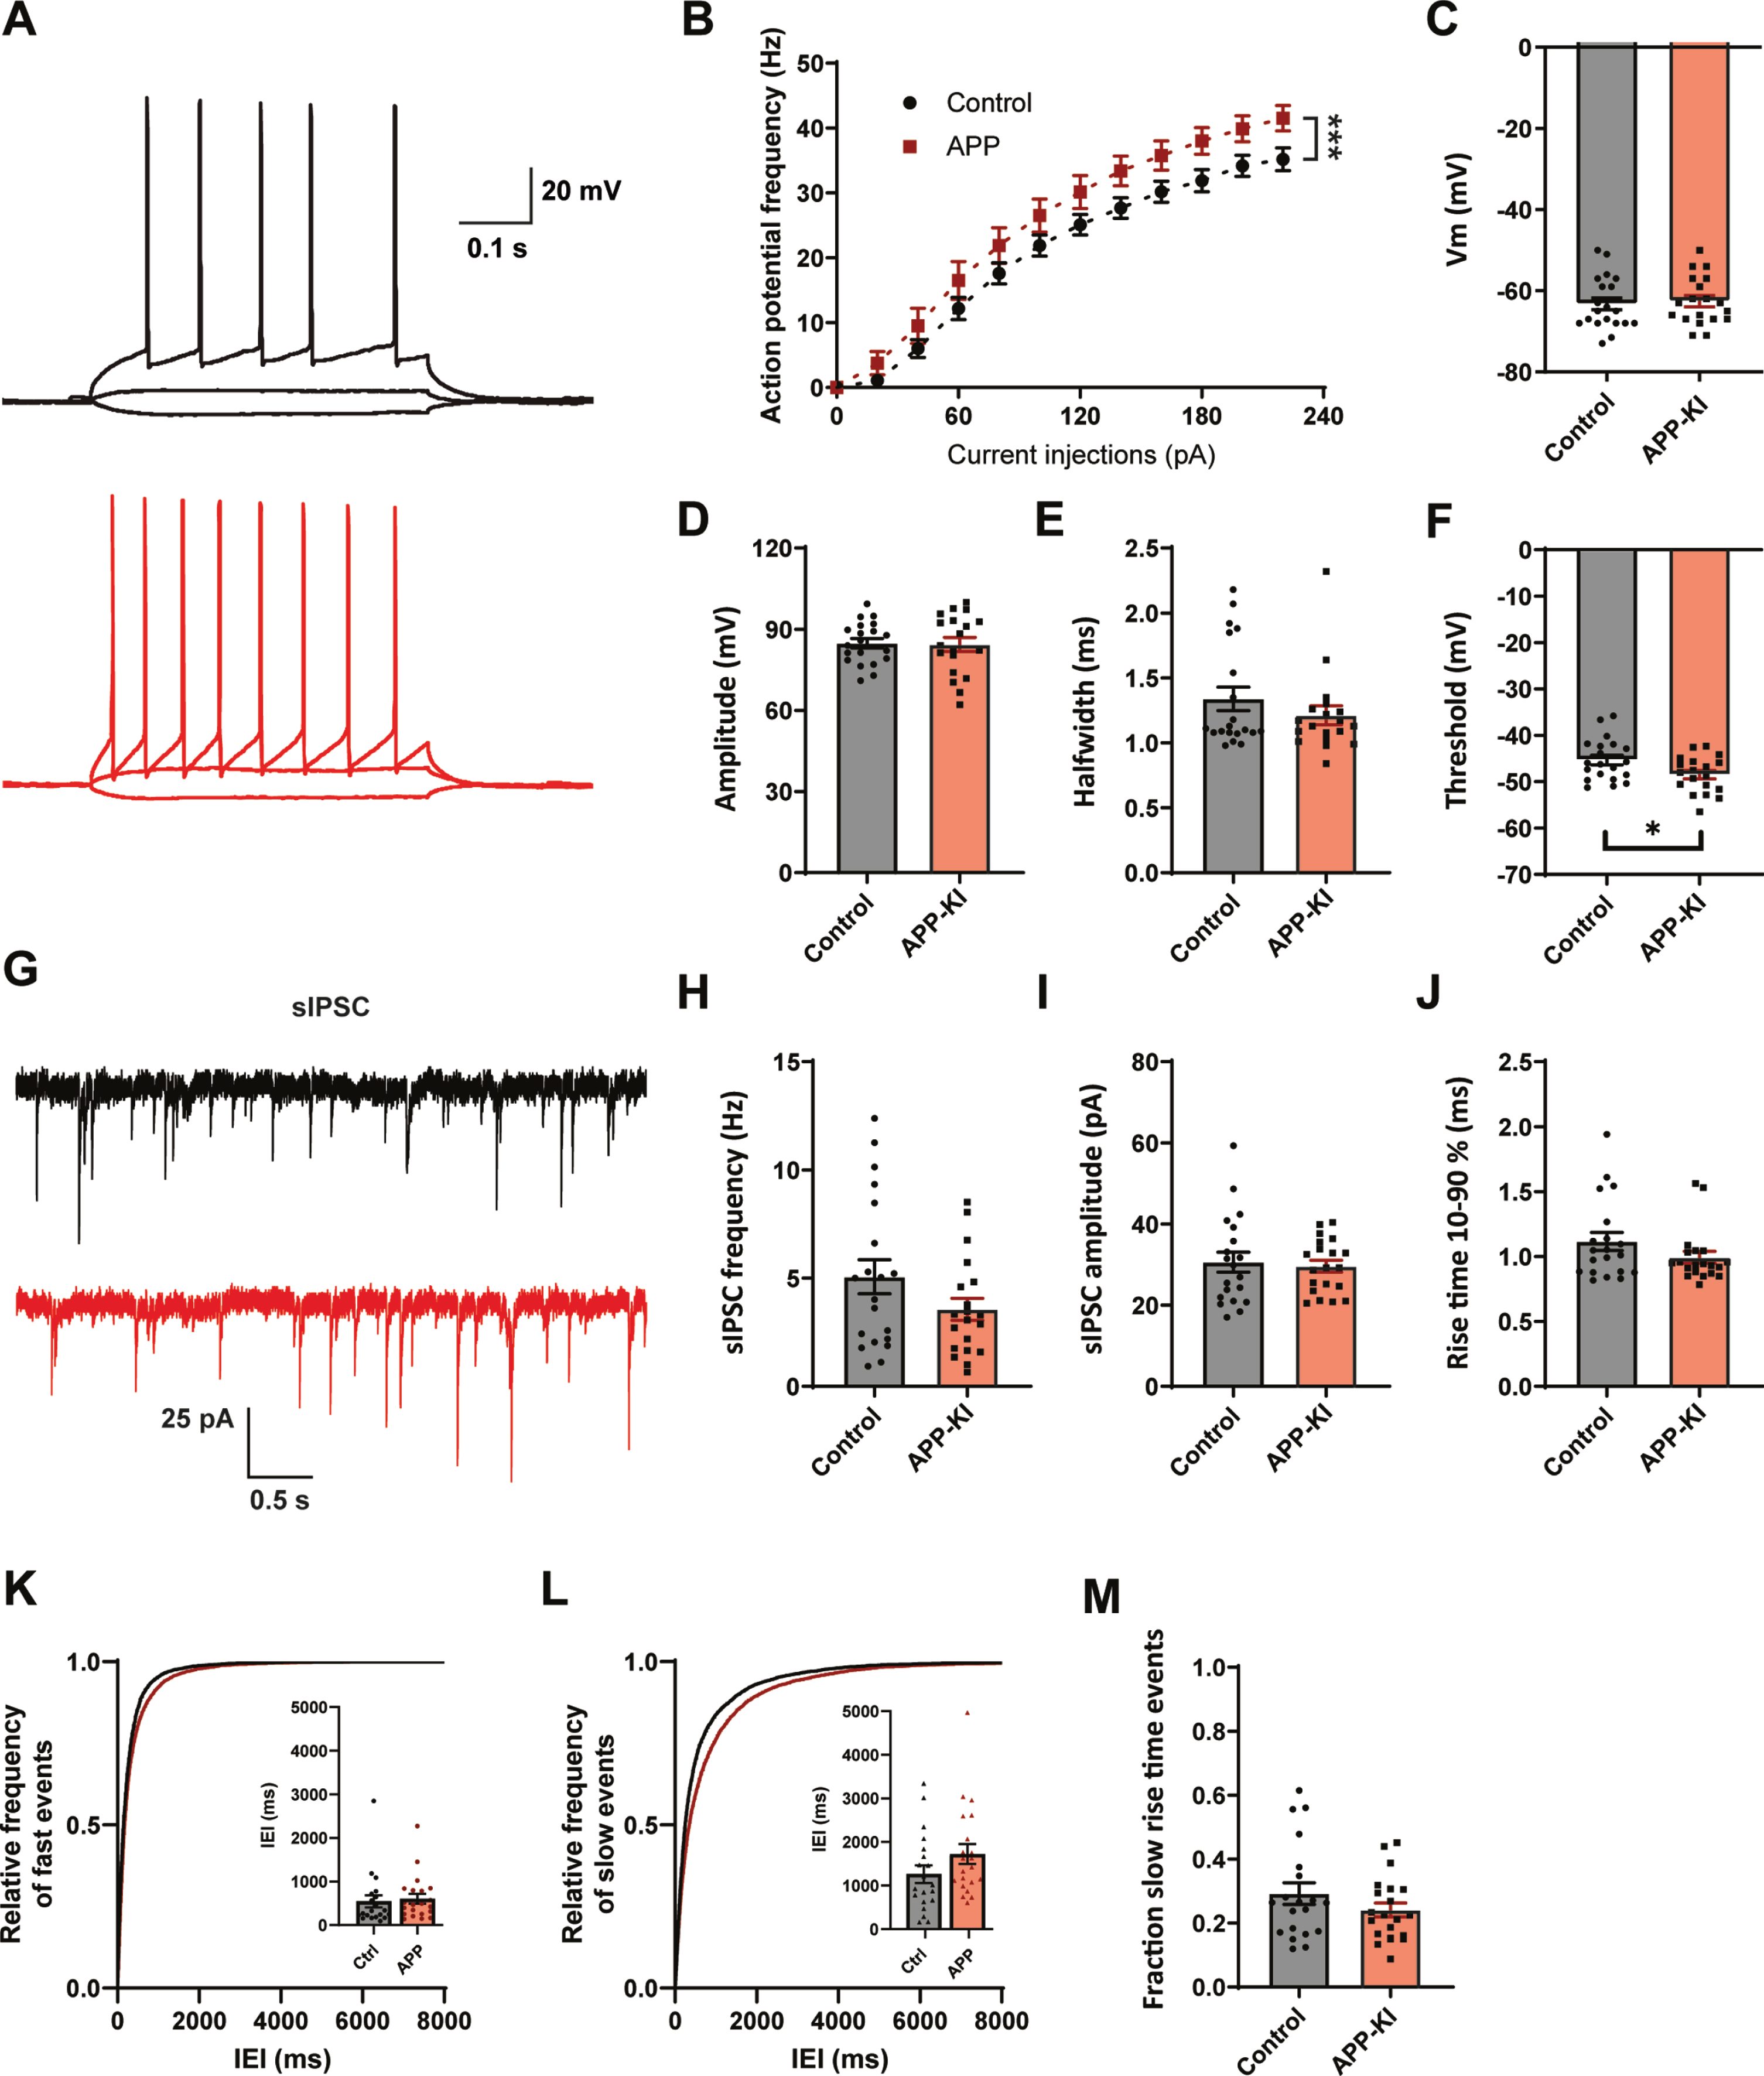 Increased excitability and mild changes IPSCs in APP-KI mice. A) Representative traces of current injections in CA1 pyramidal neurons of control (black) and APP-KI (red) slices. B) APP-KI cells were able to fire action potentials at a higher frequency than control cells at increasing current injections (p < 0.0001 2w ANOVA). C) Resting membrane voltage of CA1 pyramidal neurons (p = 0.73, t). D–F) Action potential amplitude (D, measured from threshold; p = 0.88, t), AP halfwidth (E; p = 0.71, MW), and AP threshold (F; p = 0.027, t) in APP-KI and control cells. G) Representative sIPSC recording from control (black) and APP-KI (red) slice. H–J) Frequency (H; p = 0.12, t), amplitude (I; p = 0.79, t), and rise time (J; p = 0.18, MW) of sIPSCs in APP-KI and control cells. K-L) Cumulative distribution of inter-event intervals (IEIs) of fast rise time (K) and slow rise time (L) events (p = 0.96 and p = 0.96, Sidak). The inserts show the mean IEI. M) Fraction of sIPSCs with slow rise times in Aβ-treated and control slices (p = 0.21, t). (Data in B–F: control n = 20, N = 9; APP-KI n = 18, N = 7. Data in H–K: control n = 20, N = 9; Aβ n = 20, N = 7).